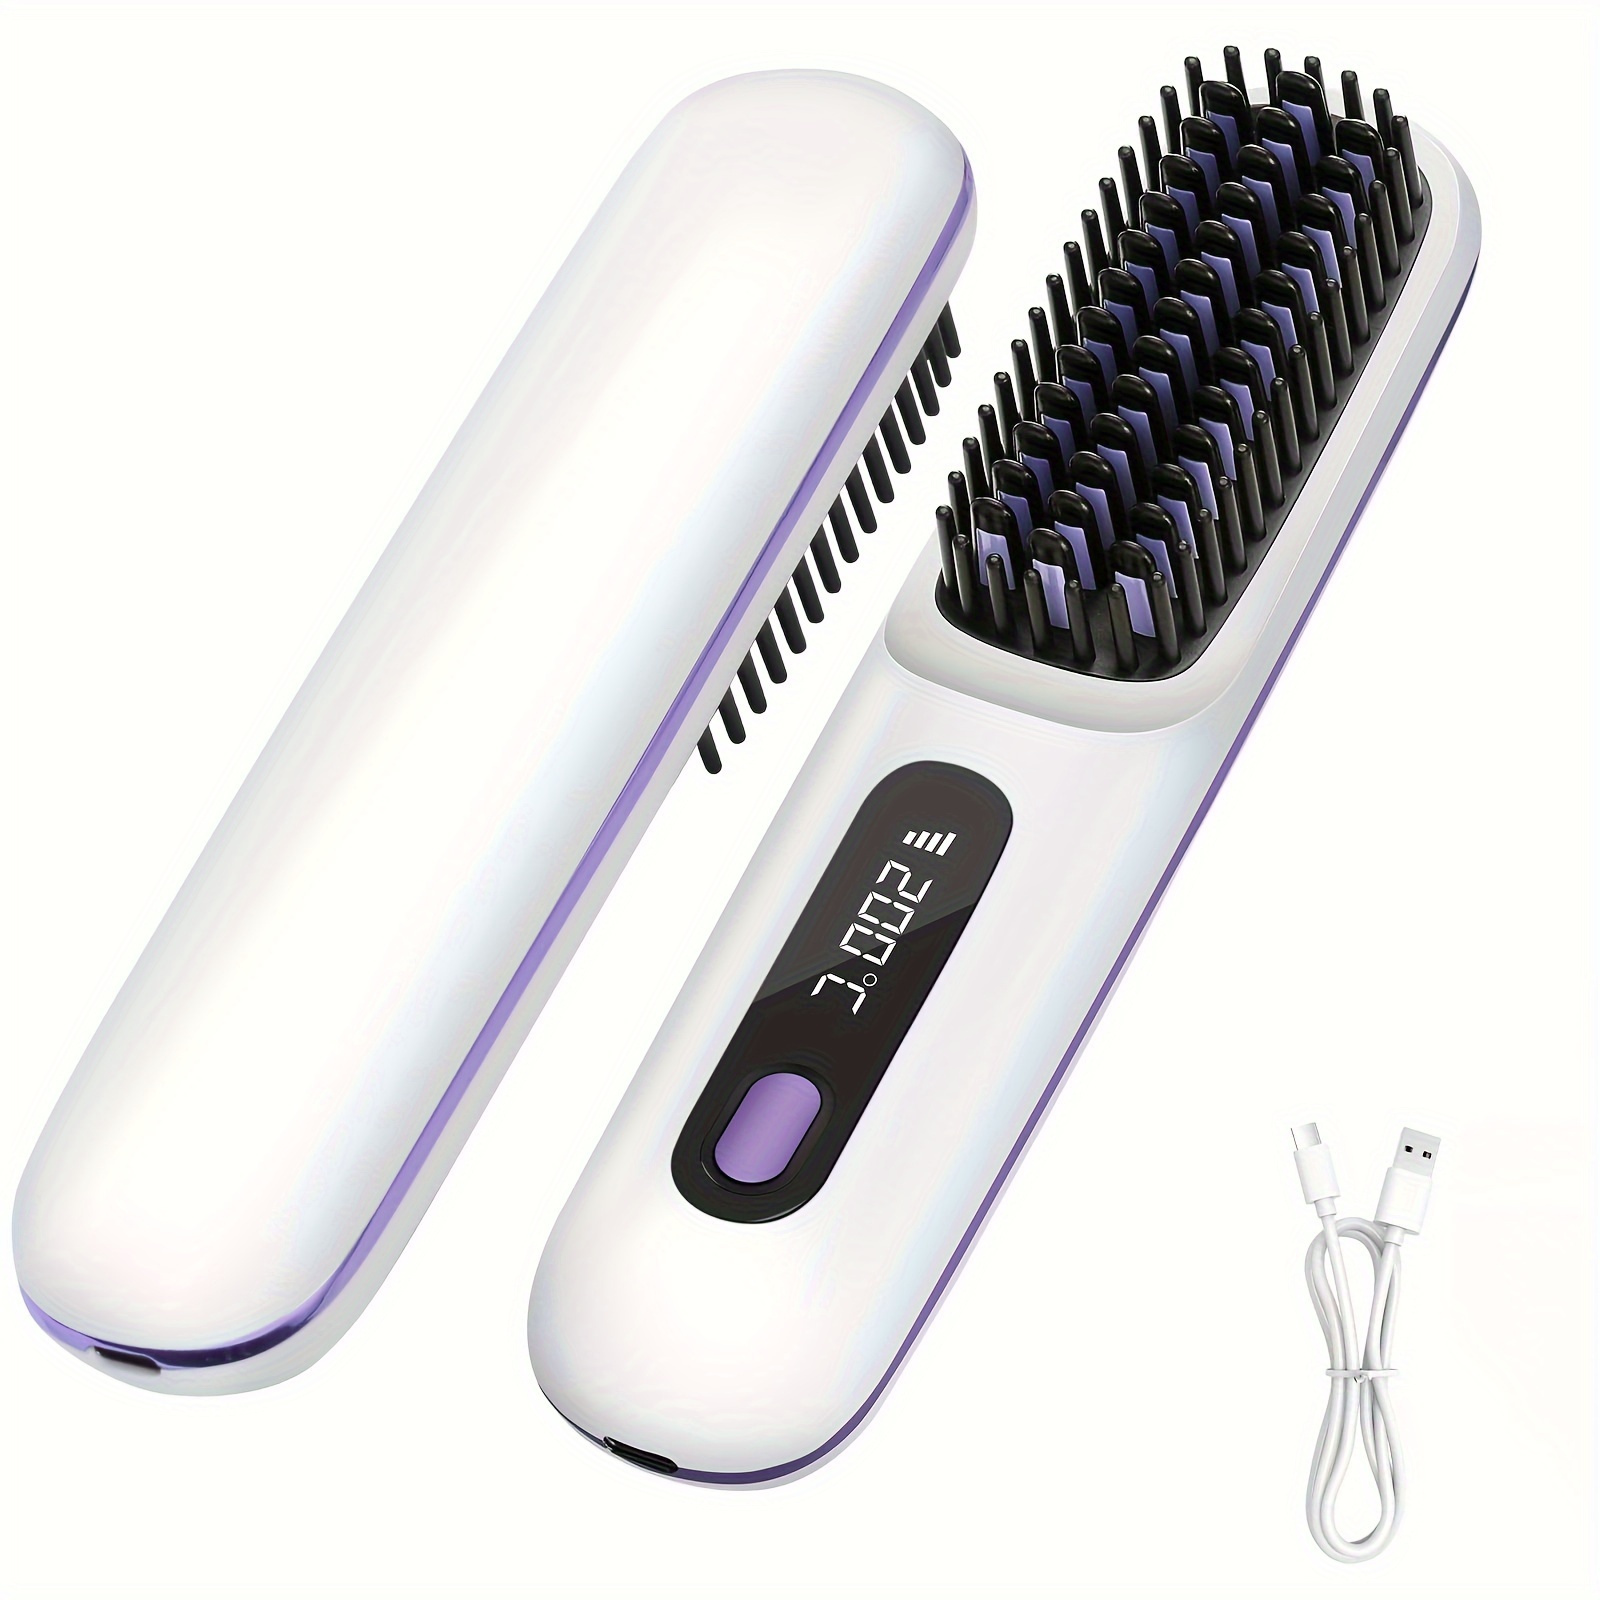 

Genai Portable Cordless Hair Straightener Brush With Led Display - Lightweight Mini Negative Ion Hot Comb, Usb Rechargeable Travel Essential Gift For Women, Anti-scald Protection